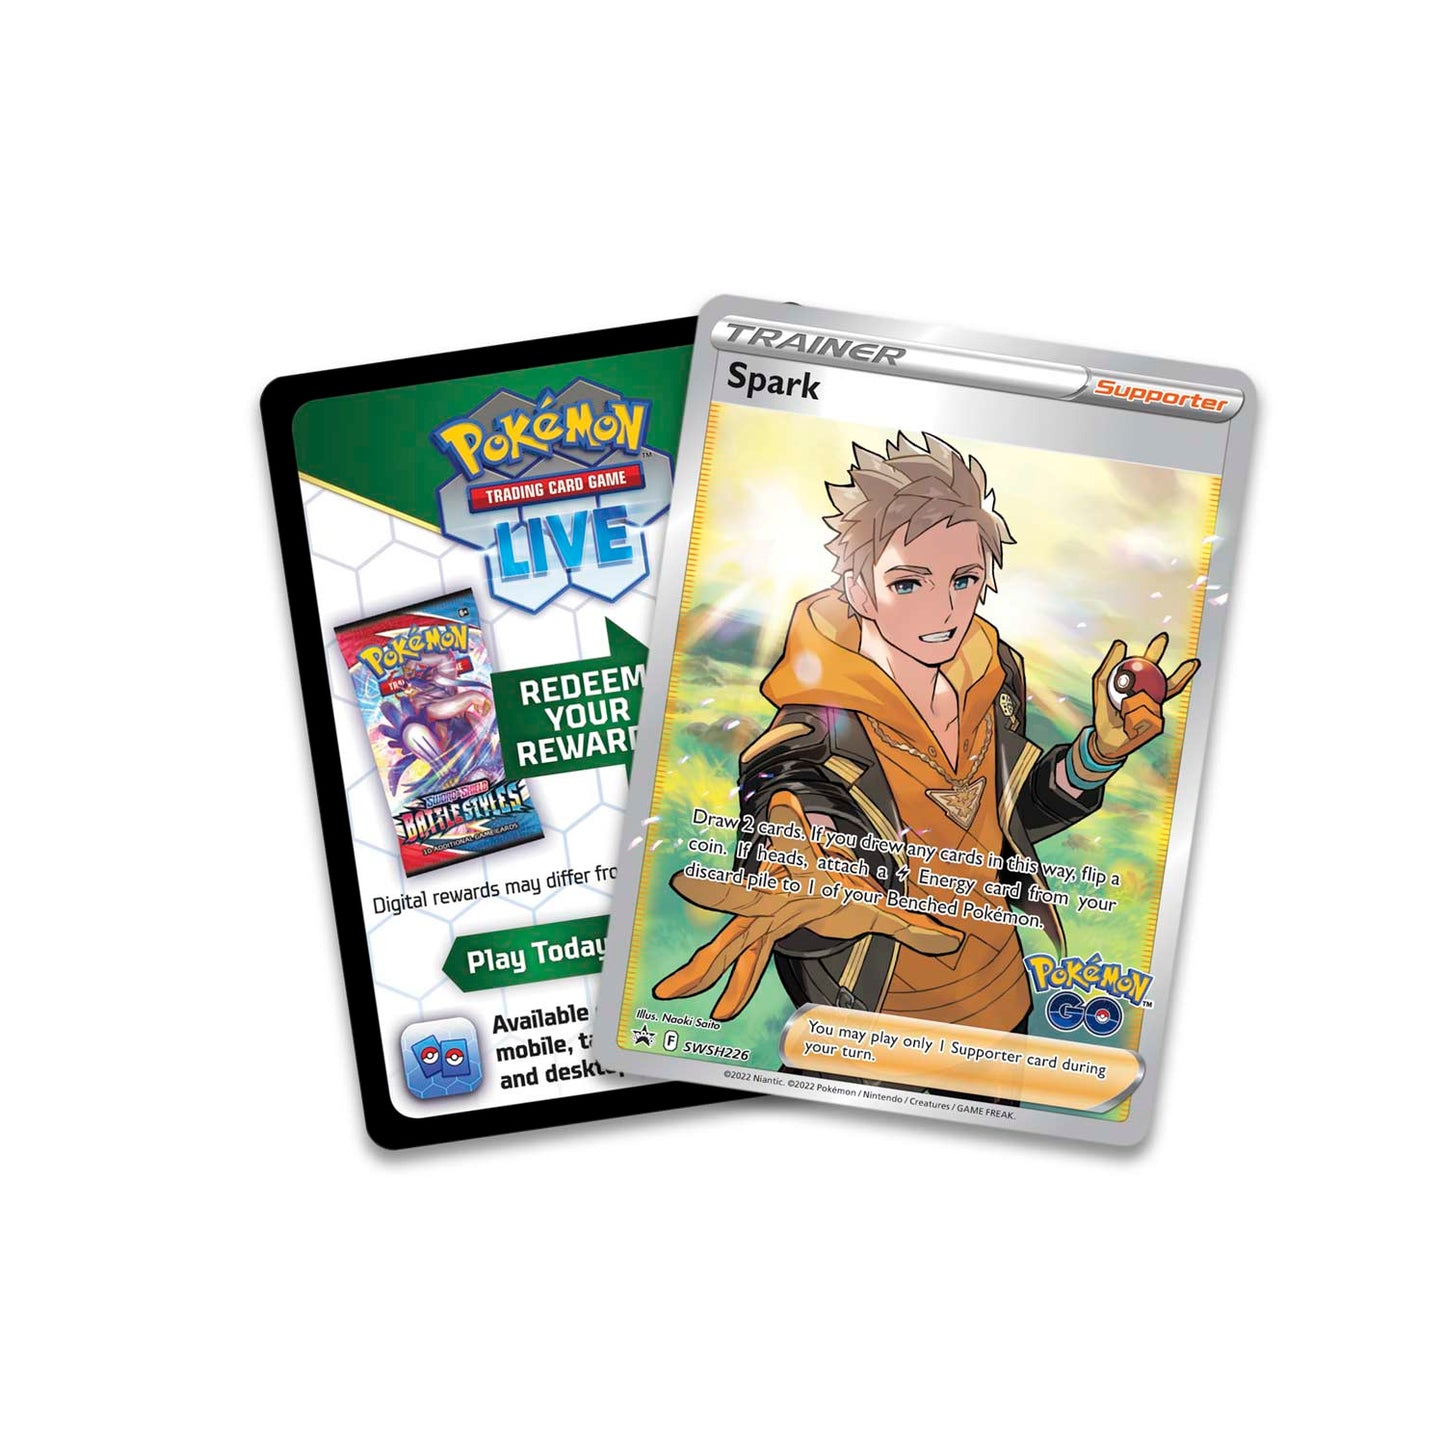 Sample of fullart trainer card included in box. (This one is Spark from Team Instinct).